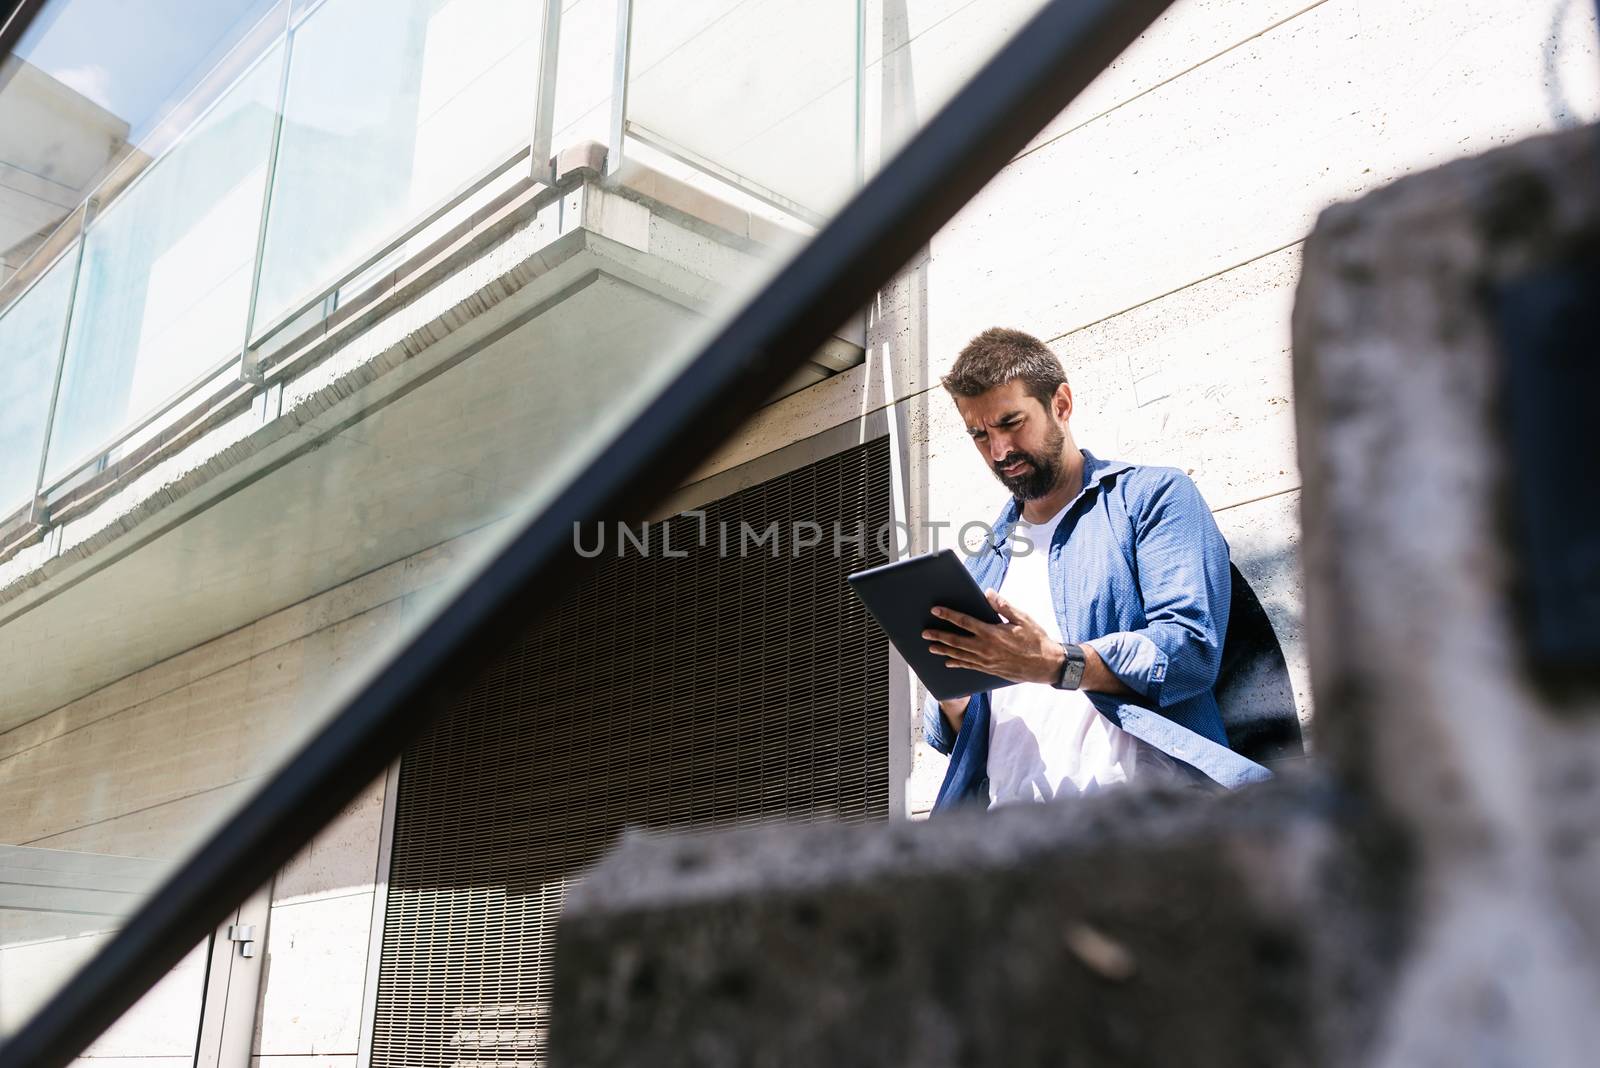 Bearded man sitting on steps while using a tablet by raferto1973